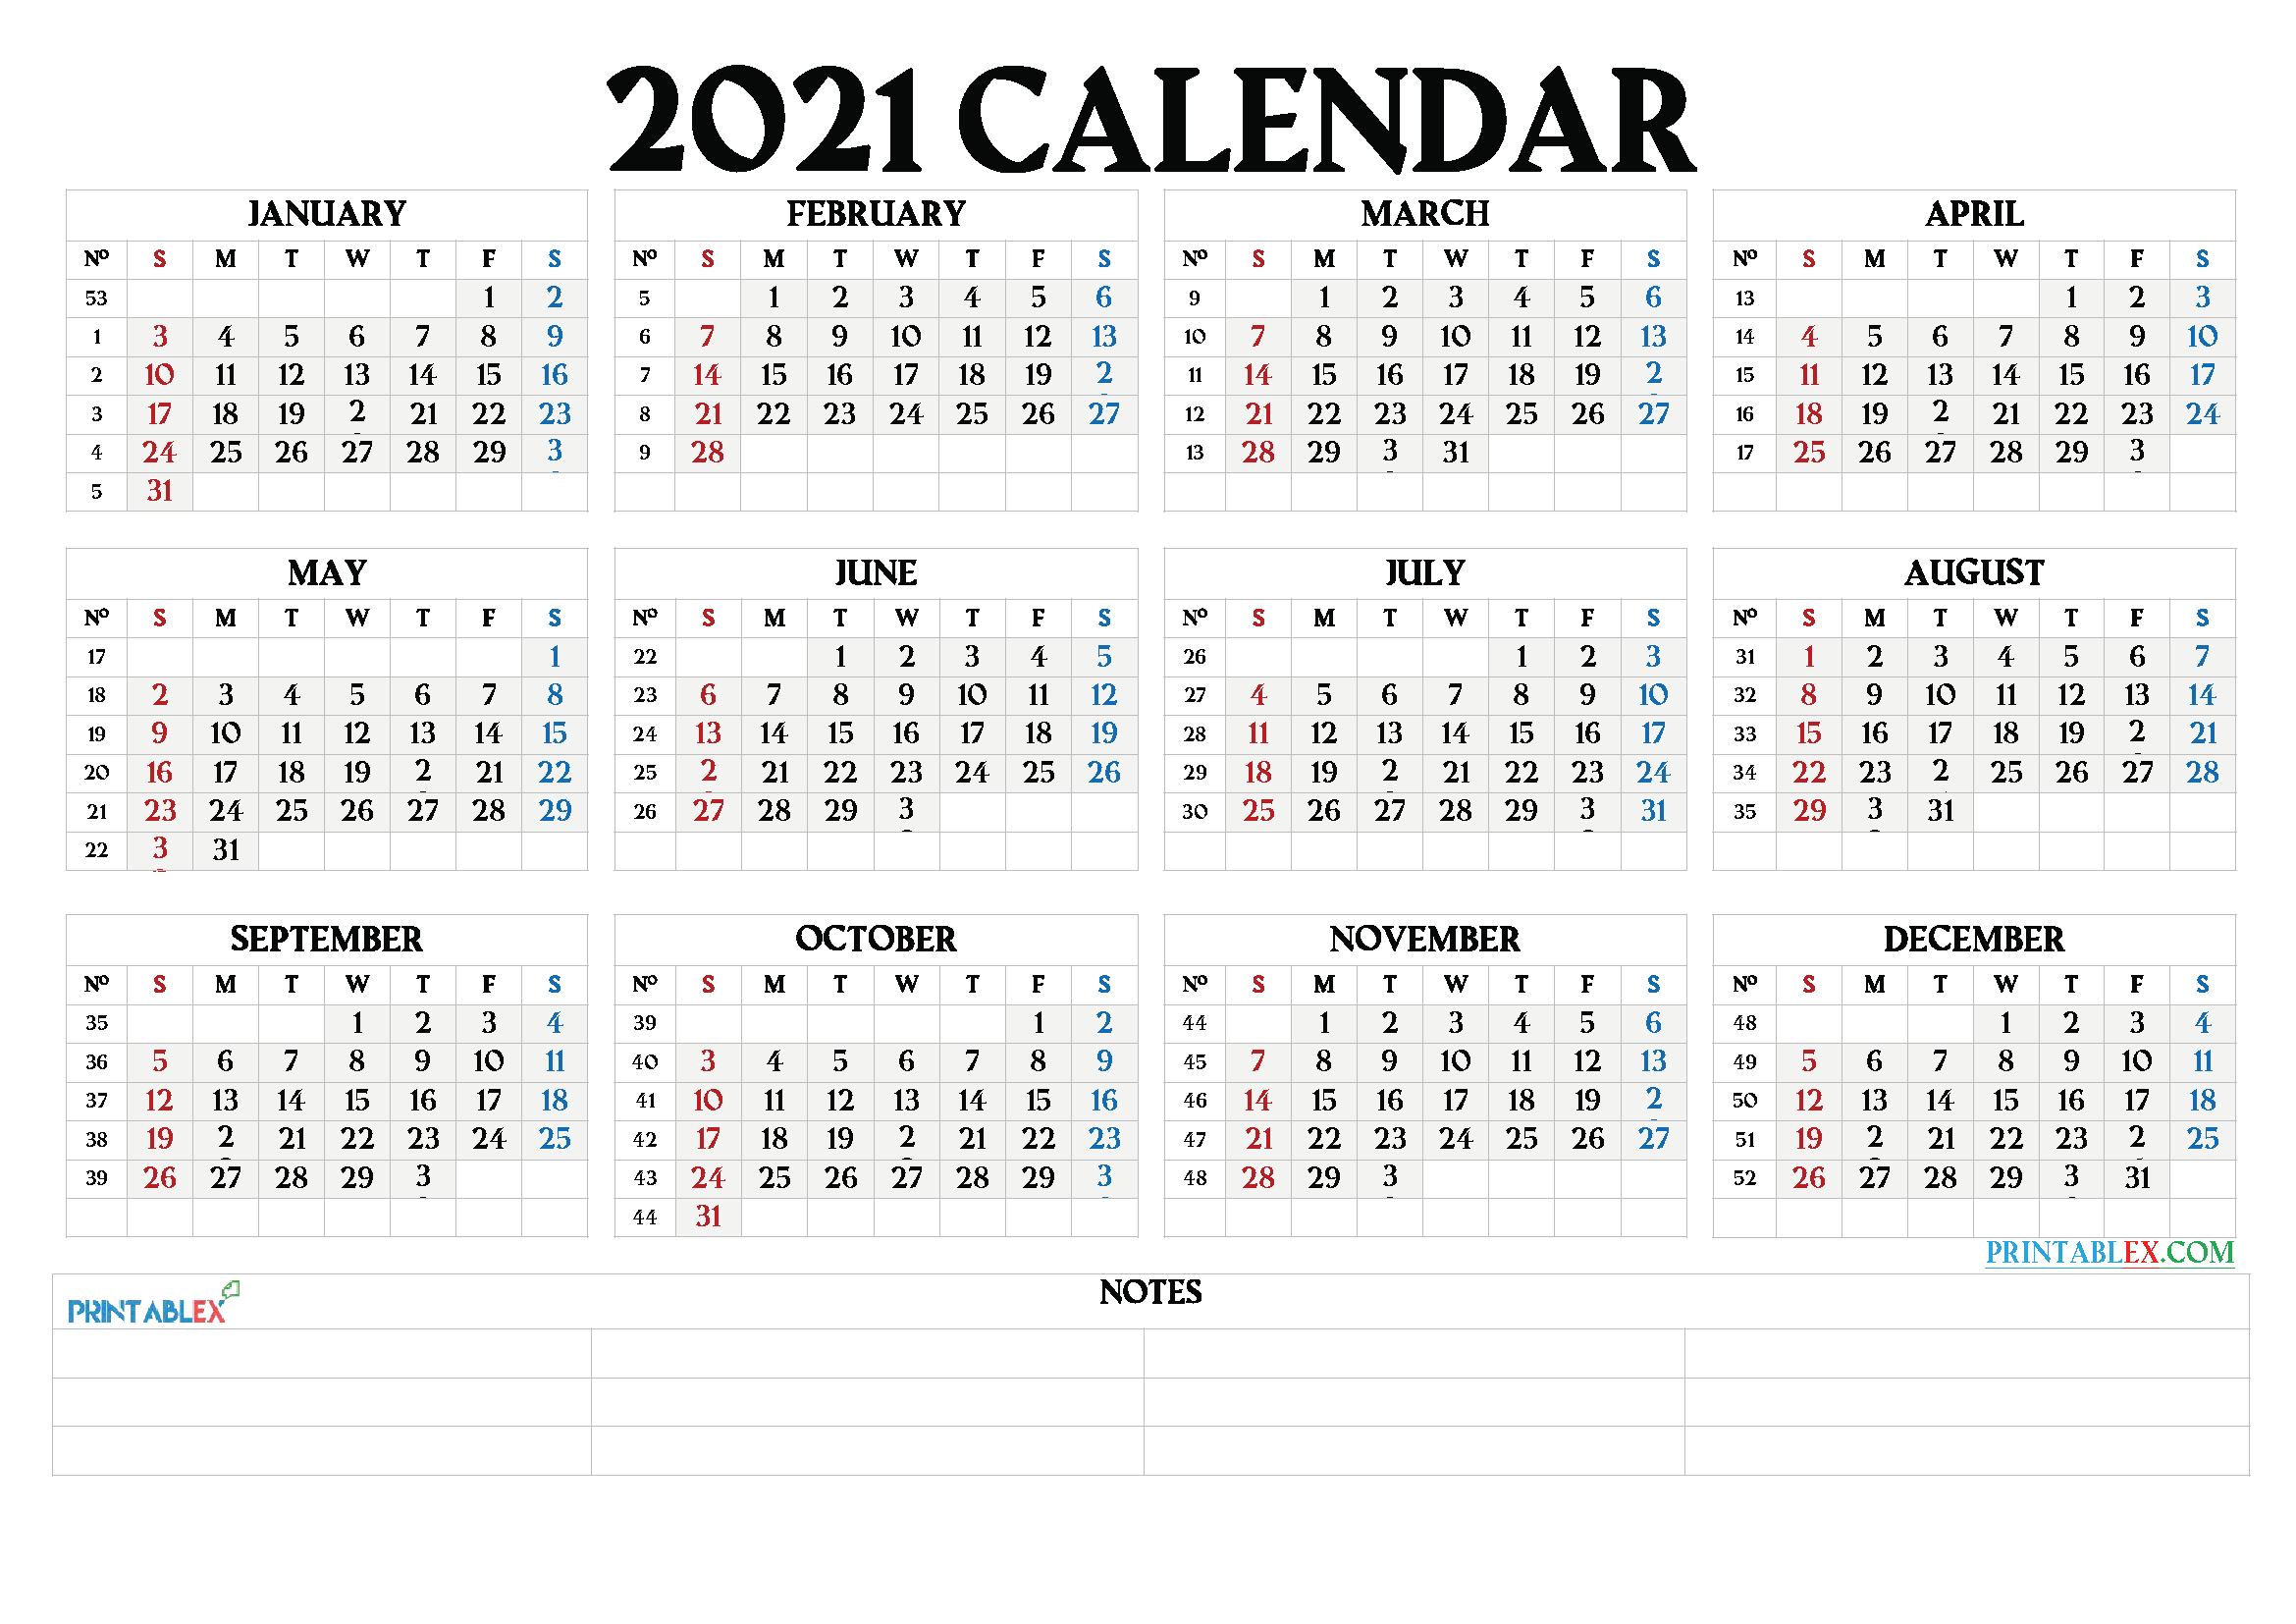 Printable 2021 Calendar By Month - 21Ytw66-Free Monthly Calendar Print Out 2021